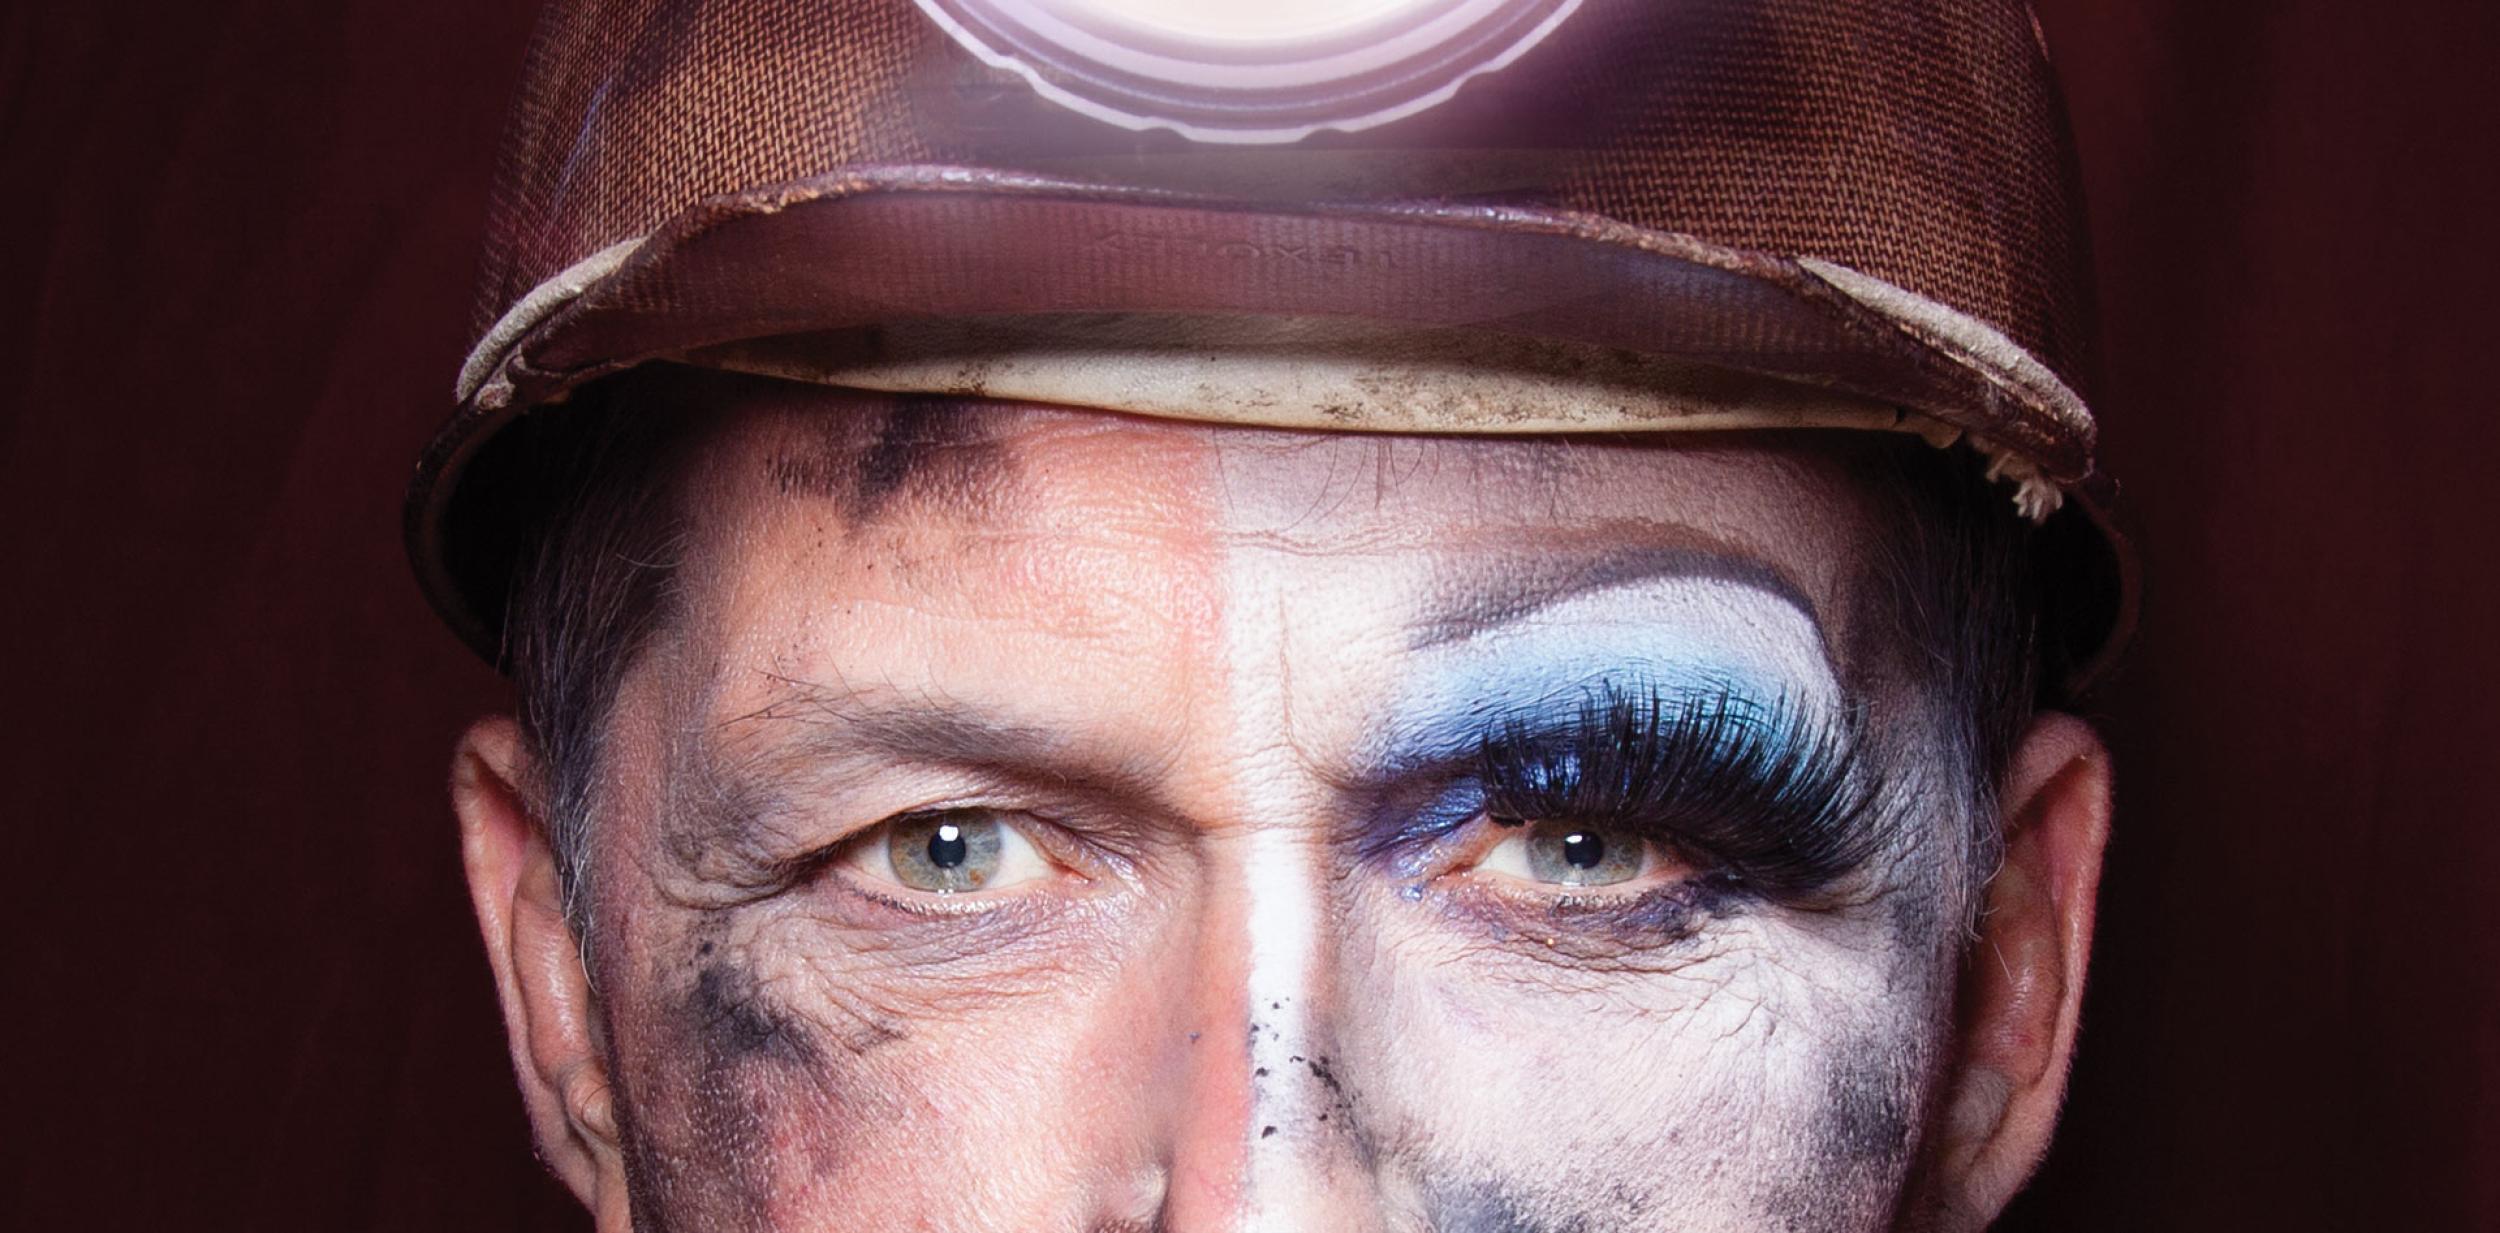 Coal miner with eye make-up